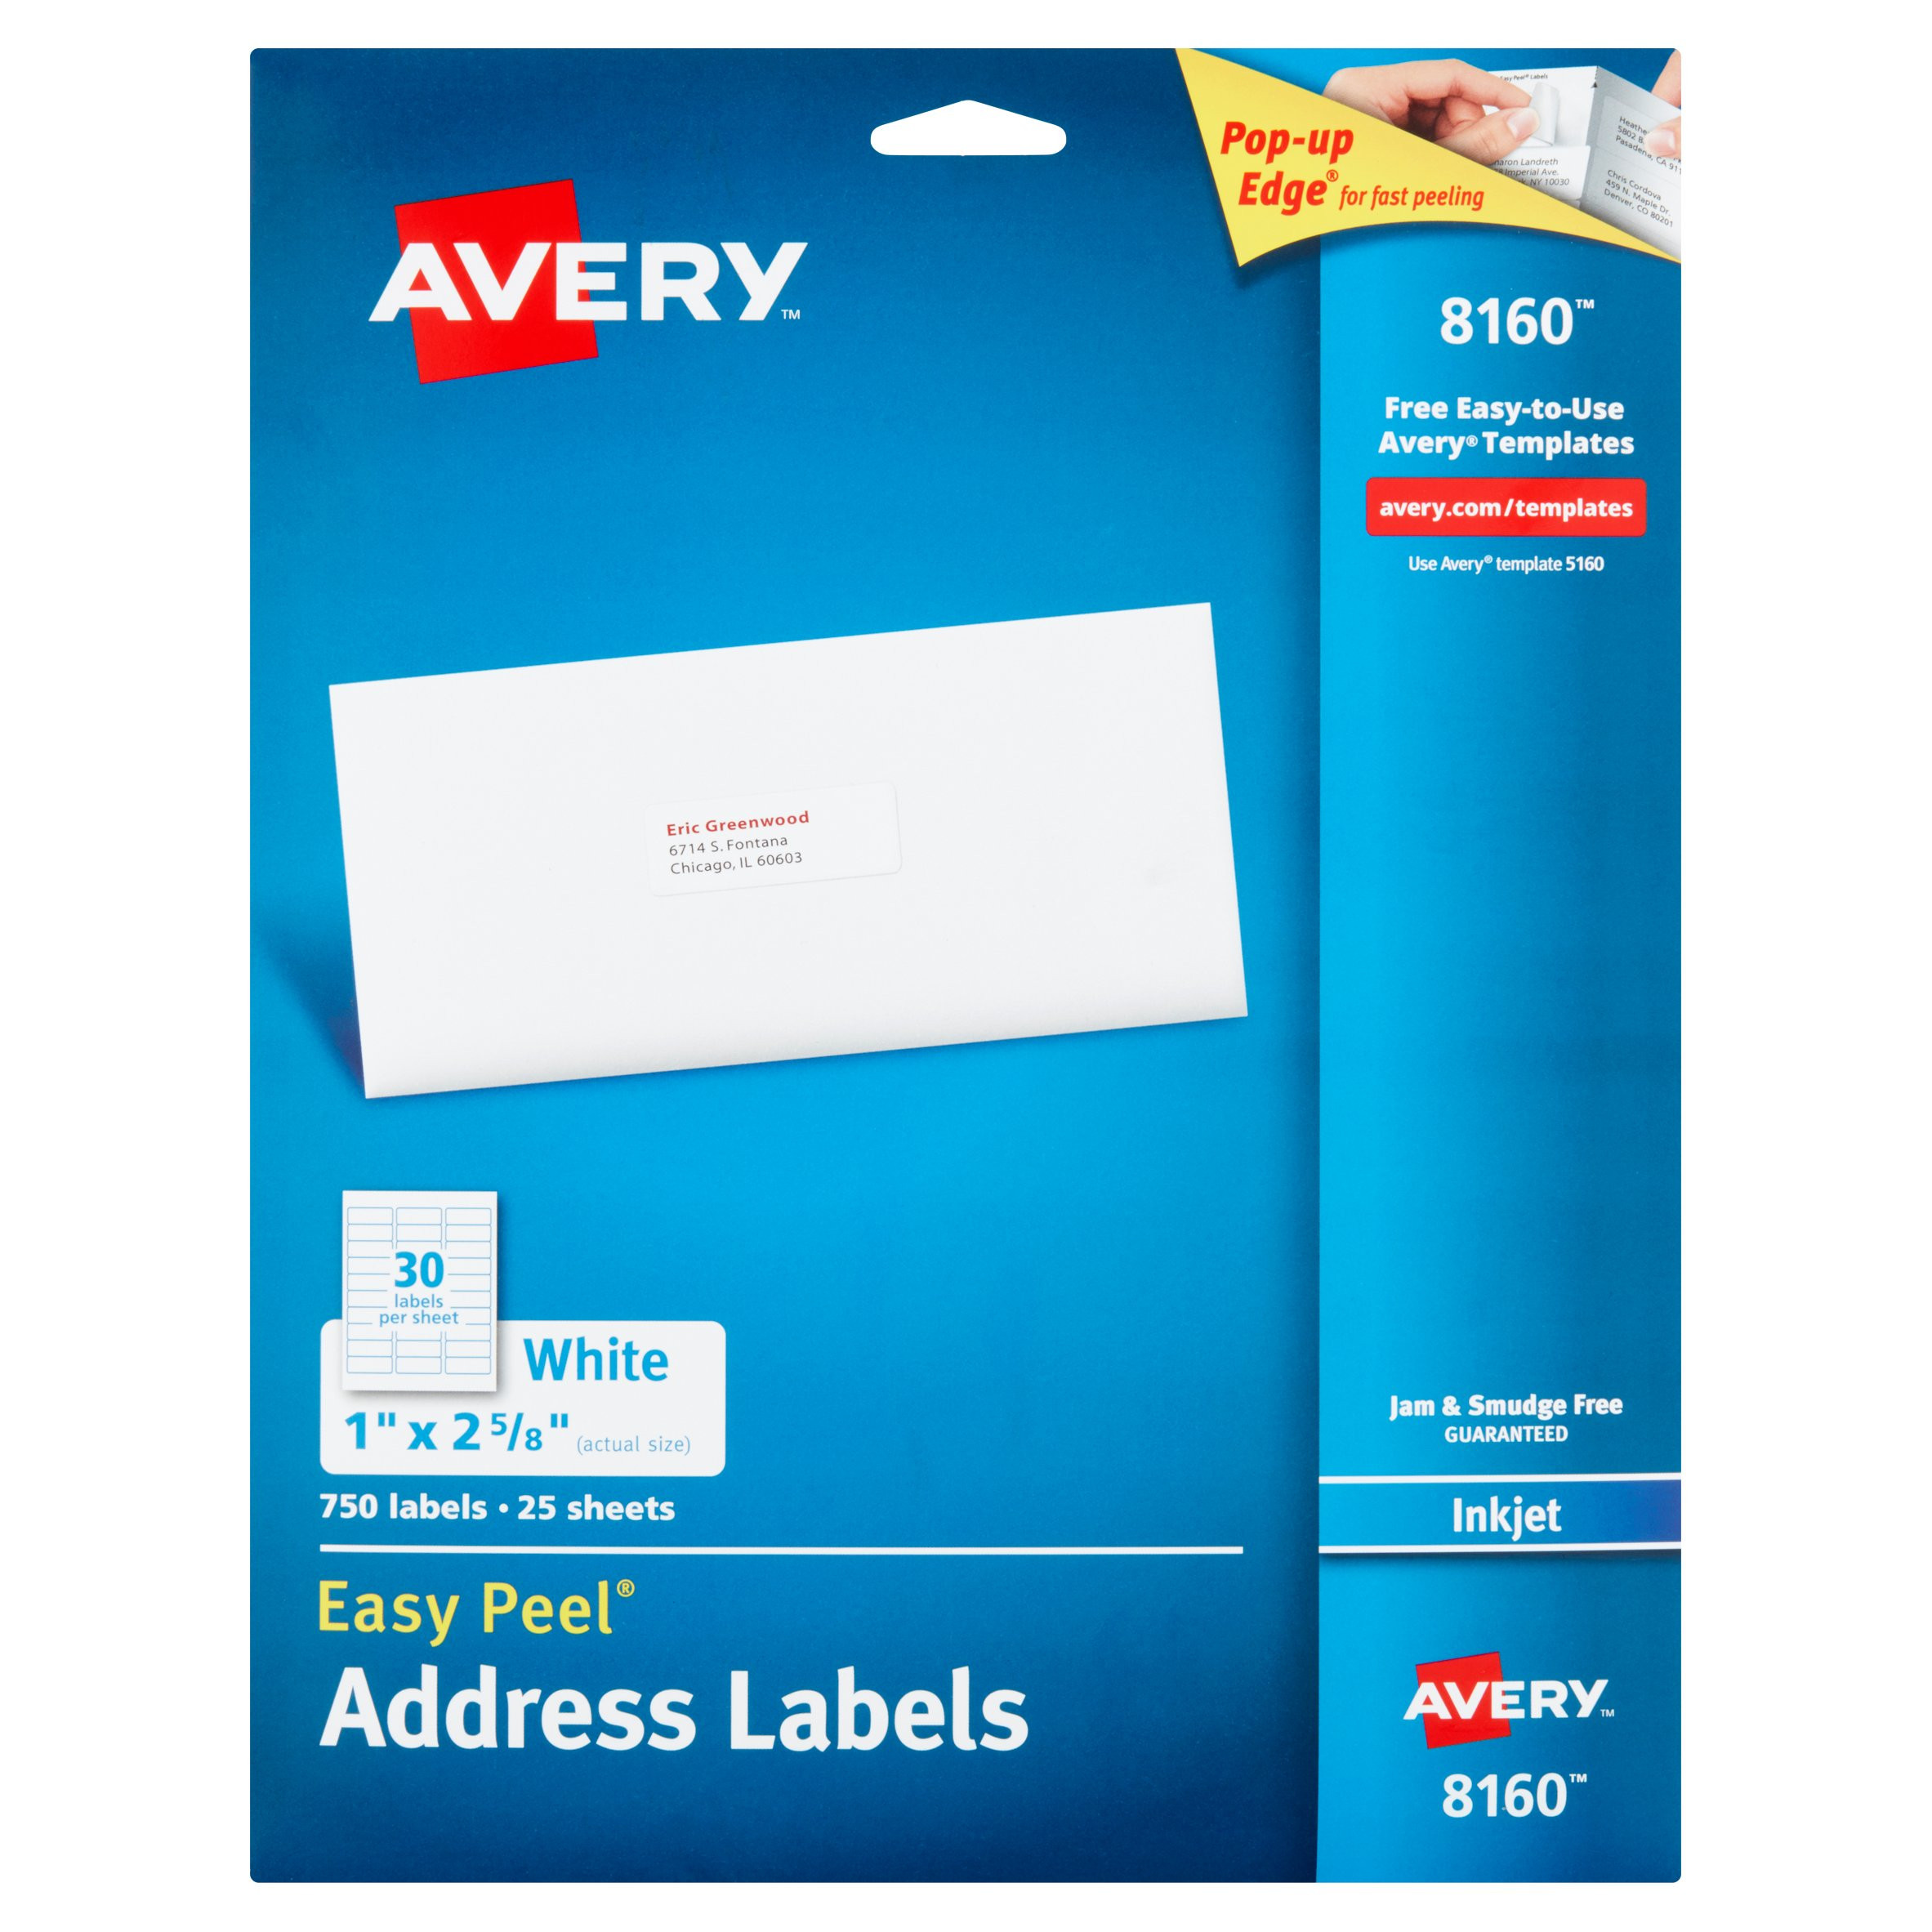 Avery Address Labels Template Quality Park White Leather Tyvek Plain Envelopes and Avery